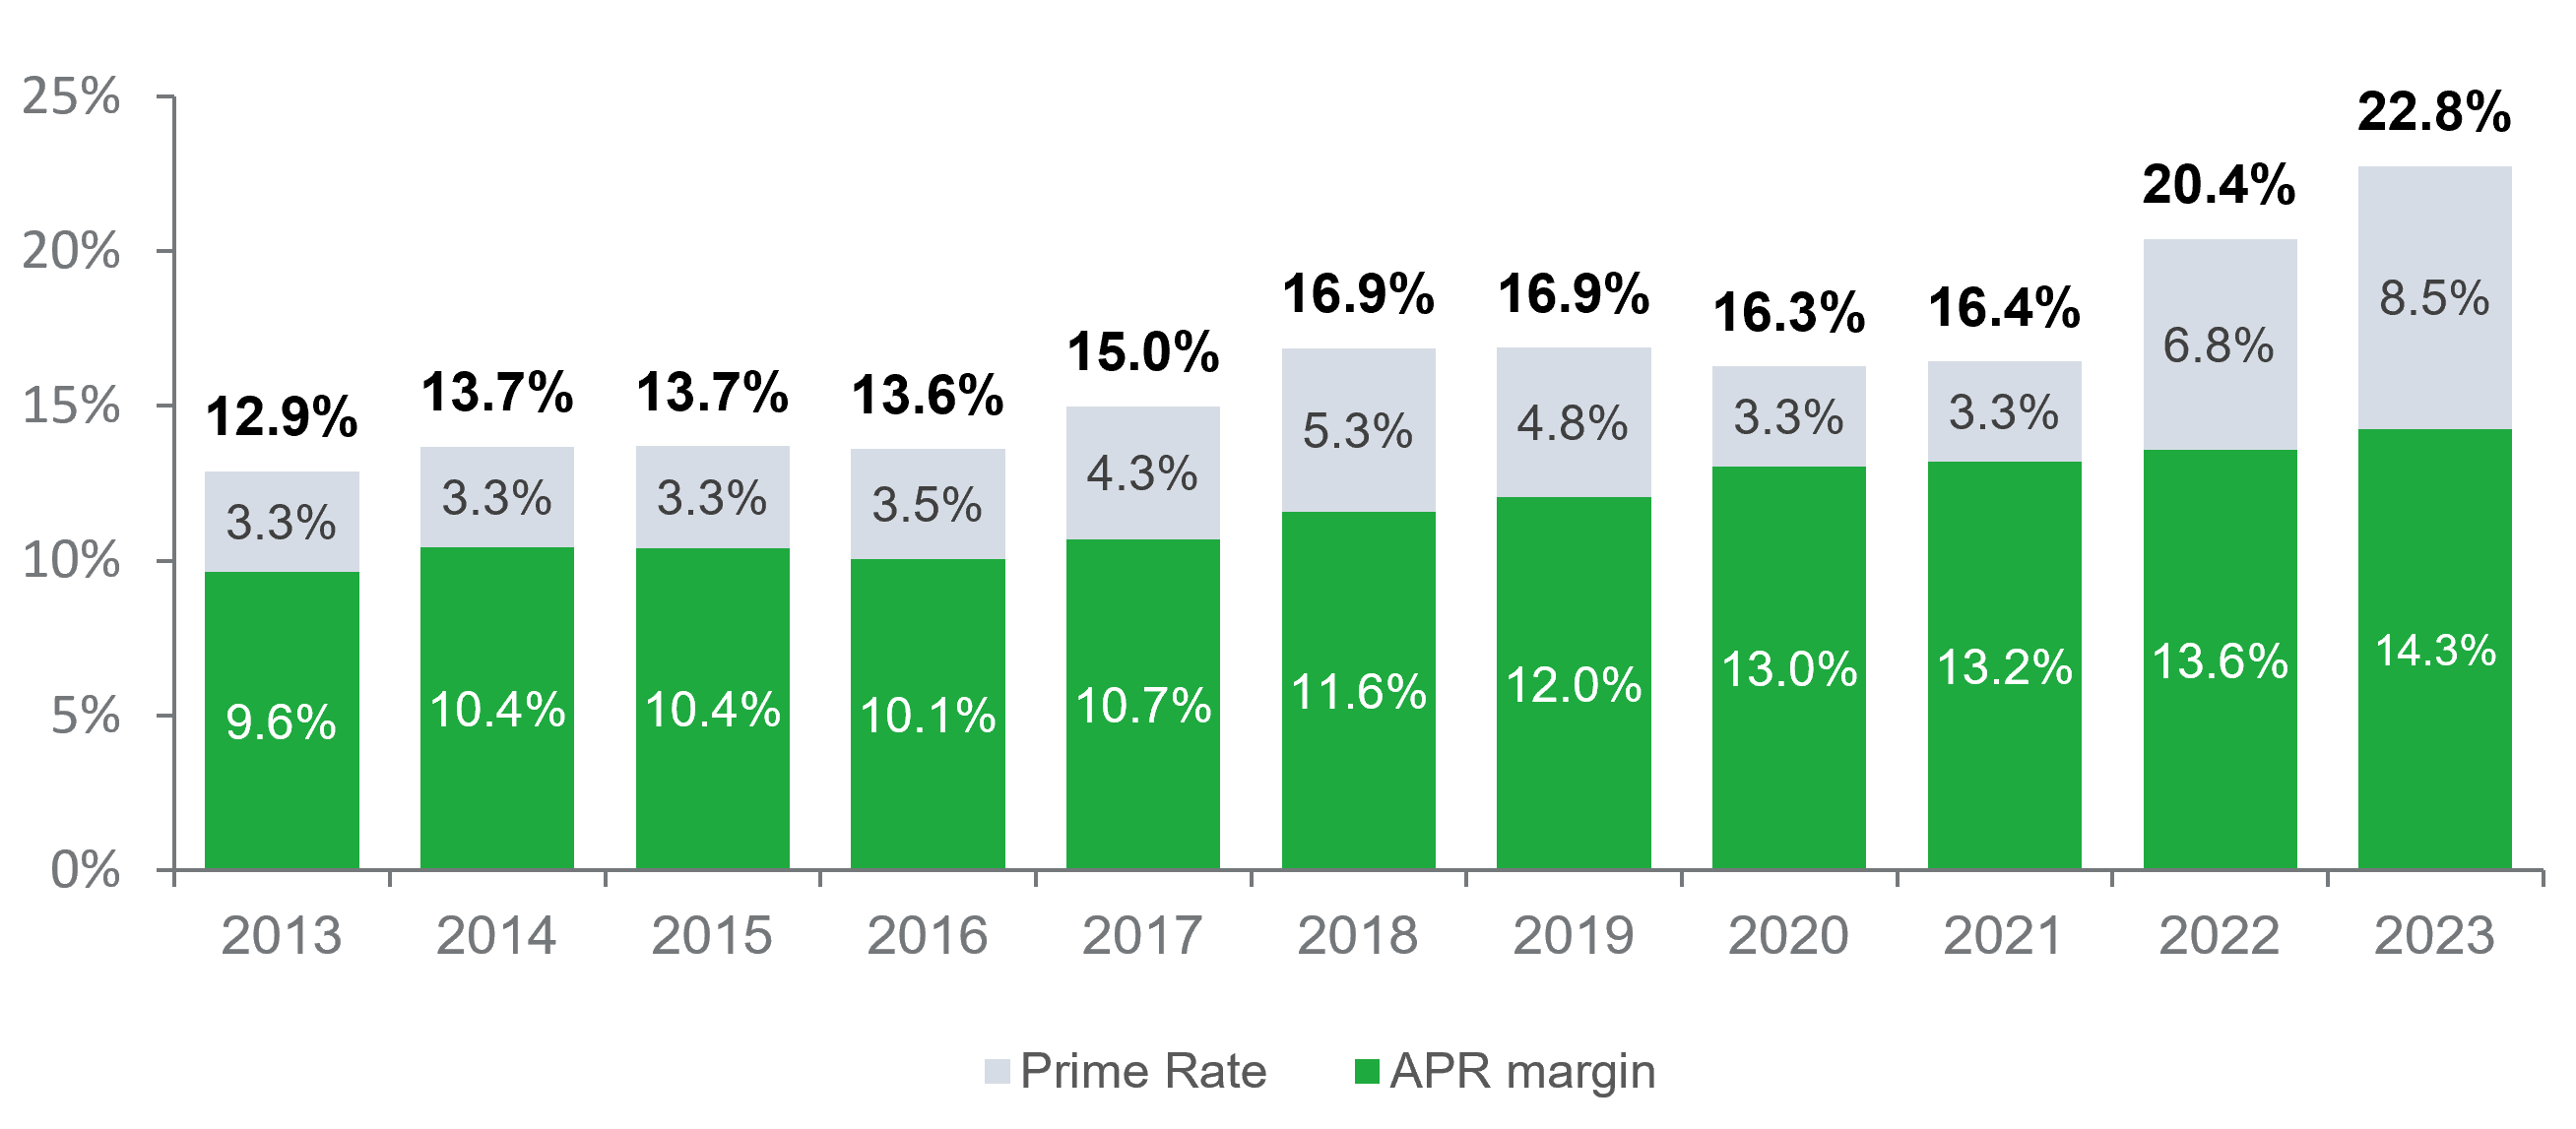 Figure 1 is a bar graph that shows the average APRs at year end from 2013 to 2023. Each year has the average APR broken down by the prime rate and APR margin. Generally, from 2013 to 2023 the APR margin has increased from 9.6 percent to 14.3 percent.